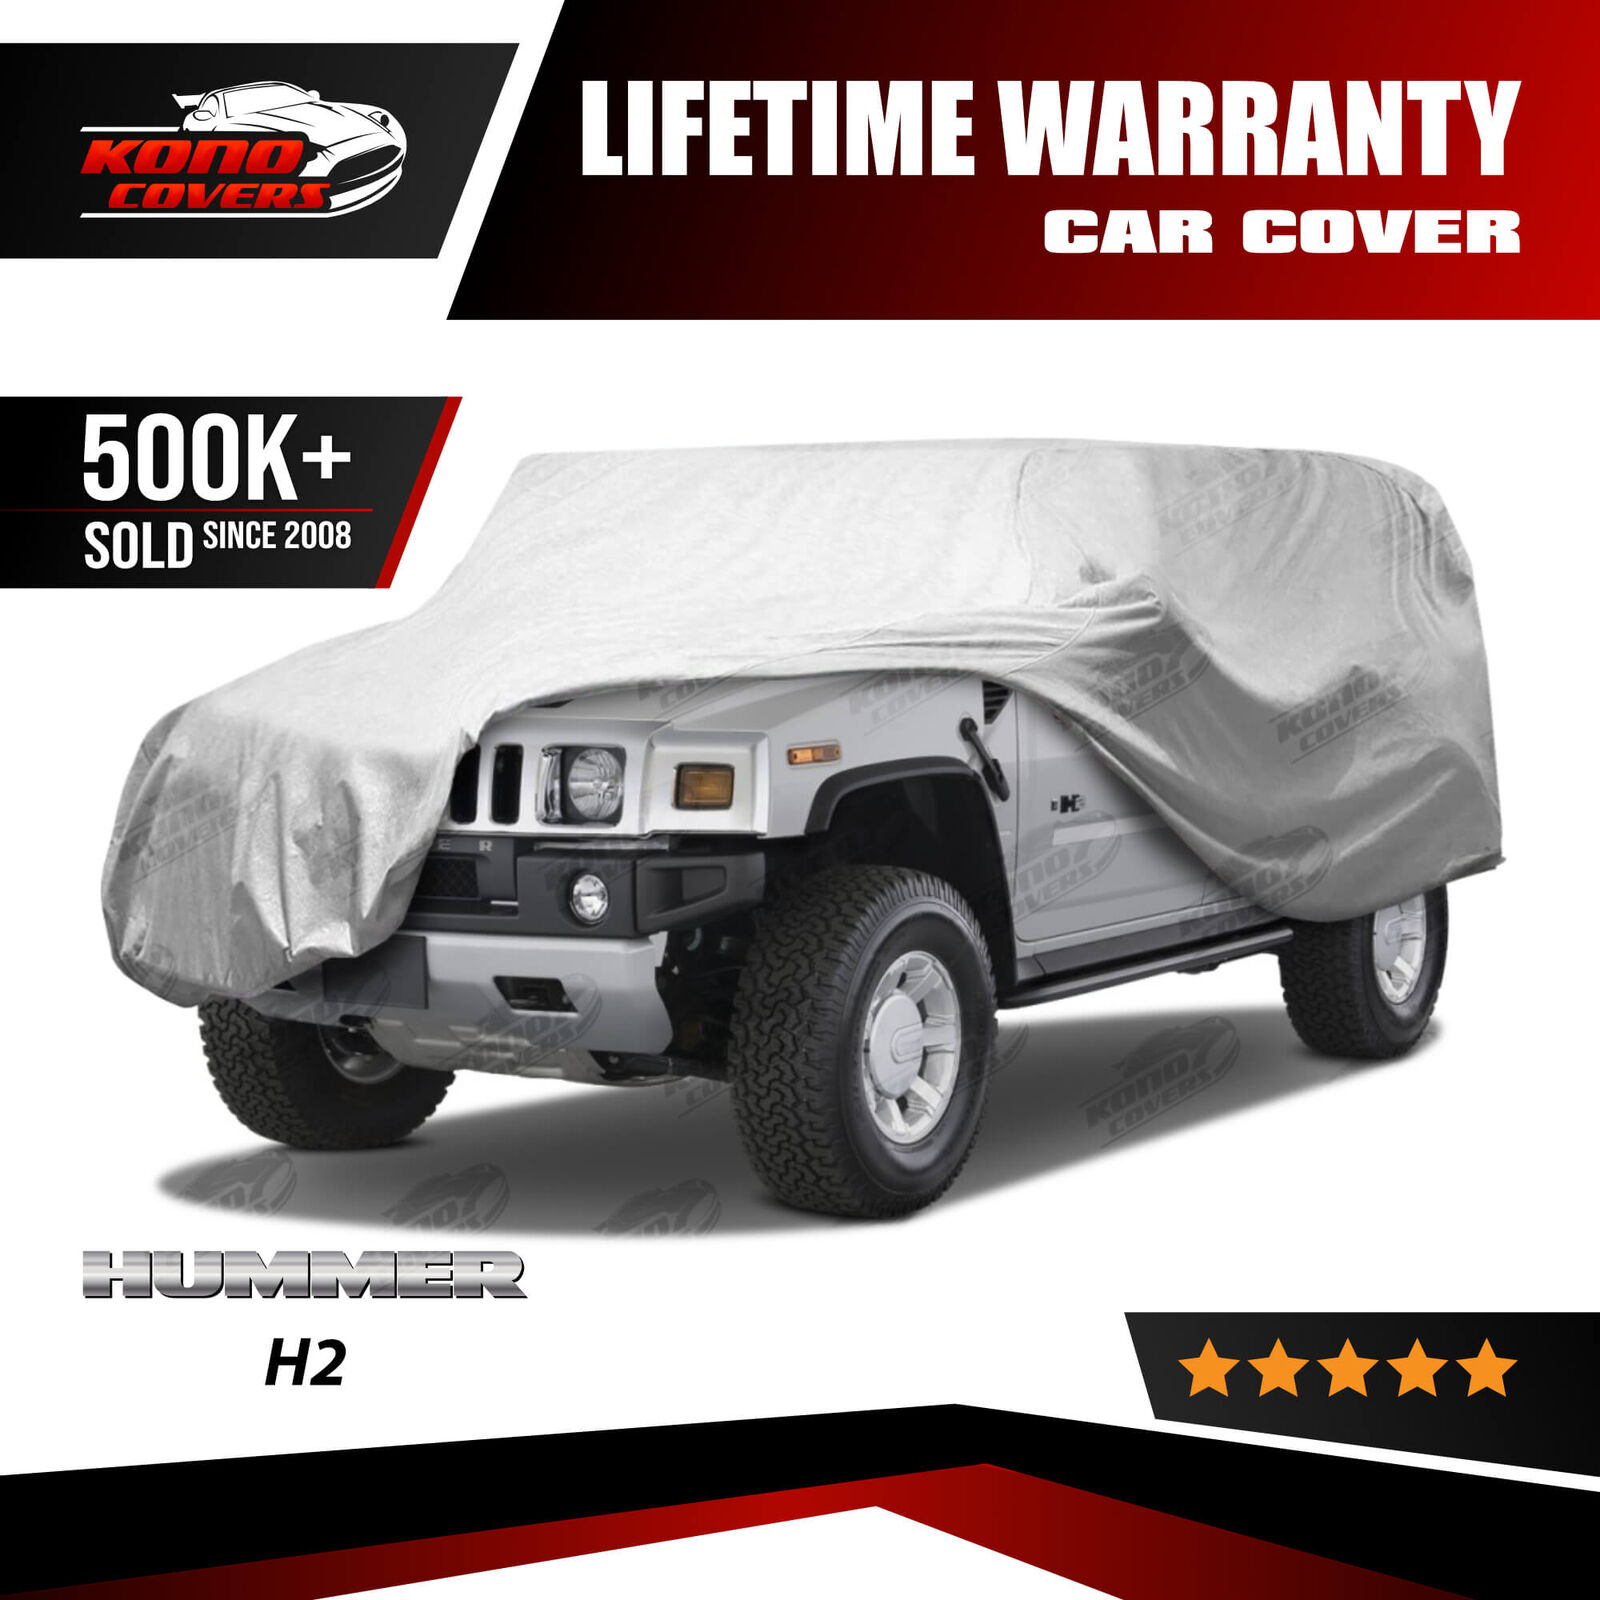 HUMMER H2 SUV SUT CAR COVER Sport Utility Outdoor Water Proof Rain Snow Sun Dust